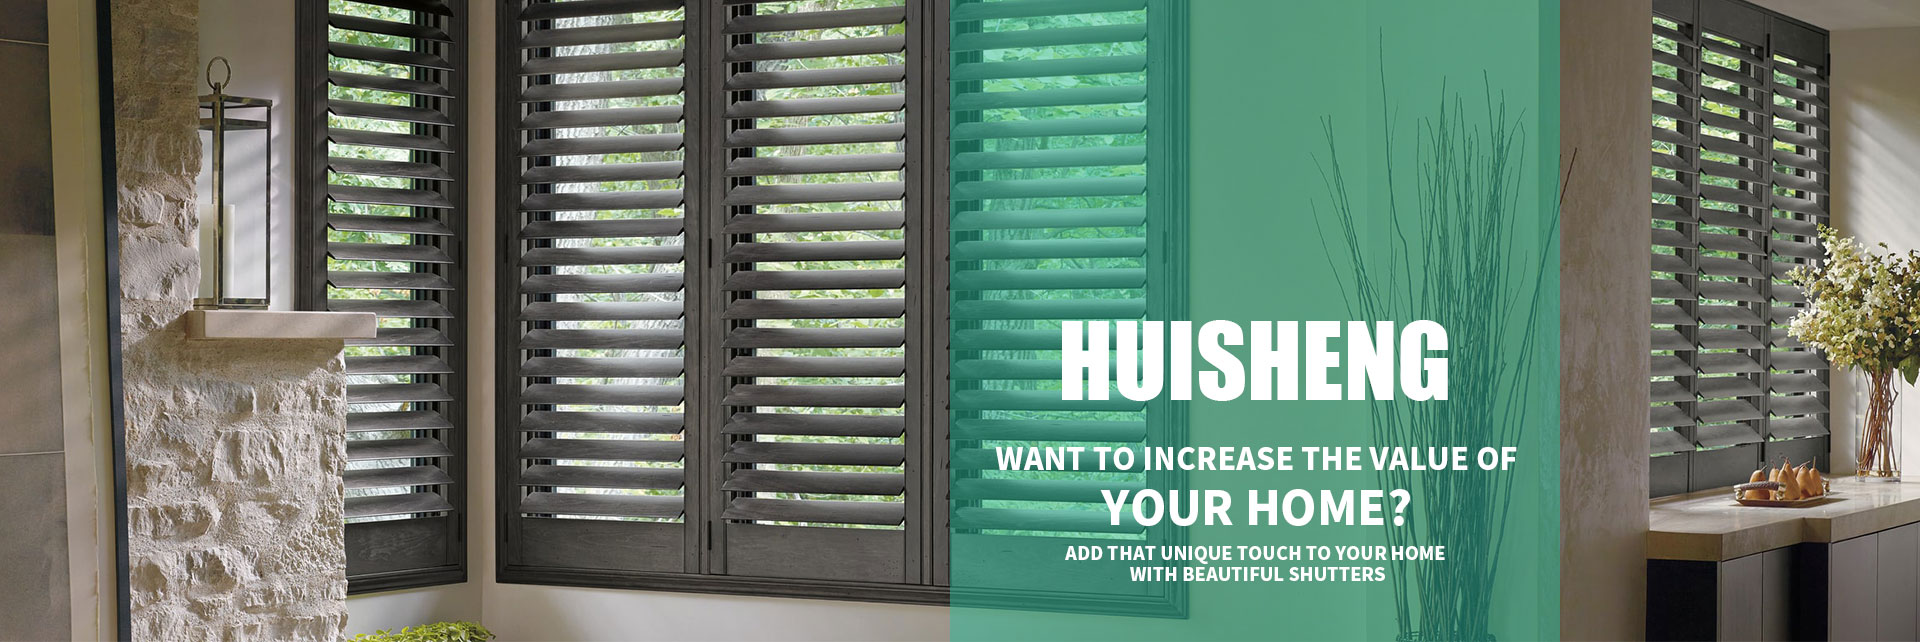 Add that unique touch to your home with beautiful shutters.